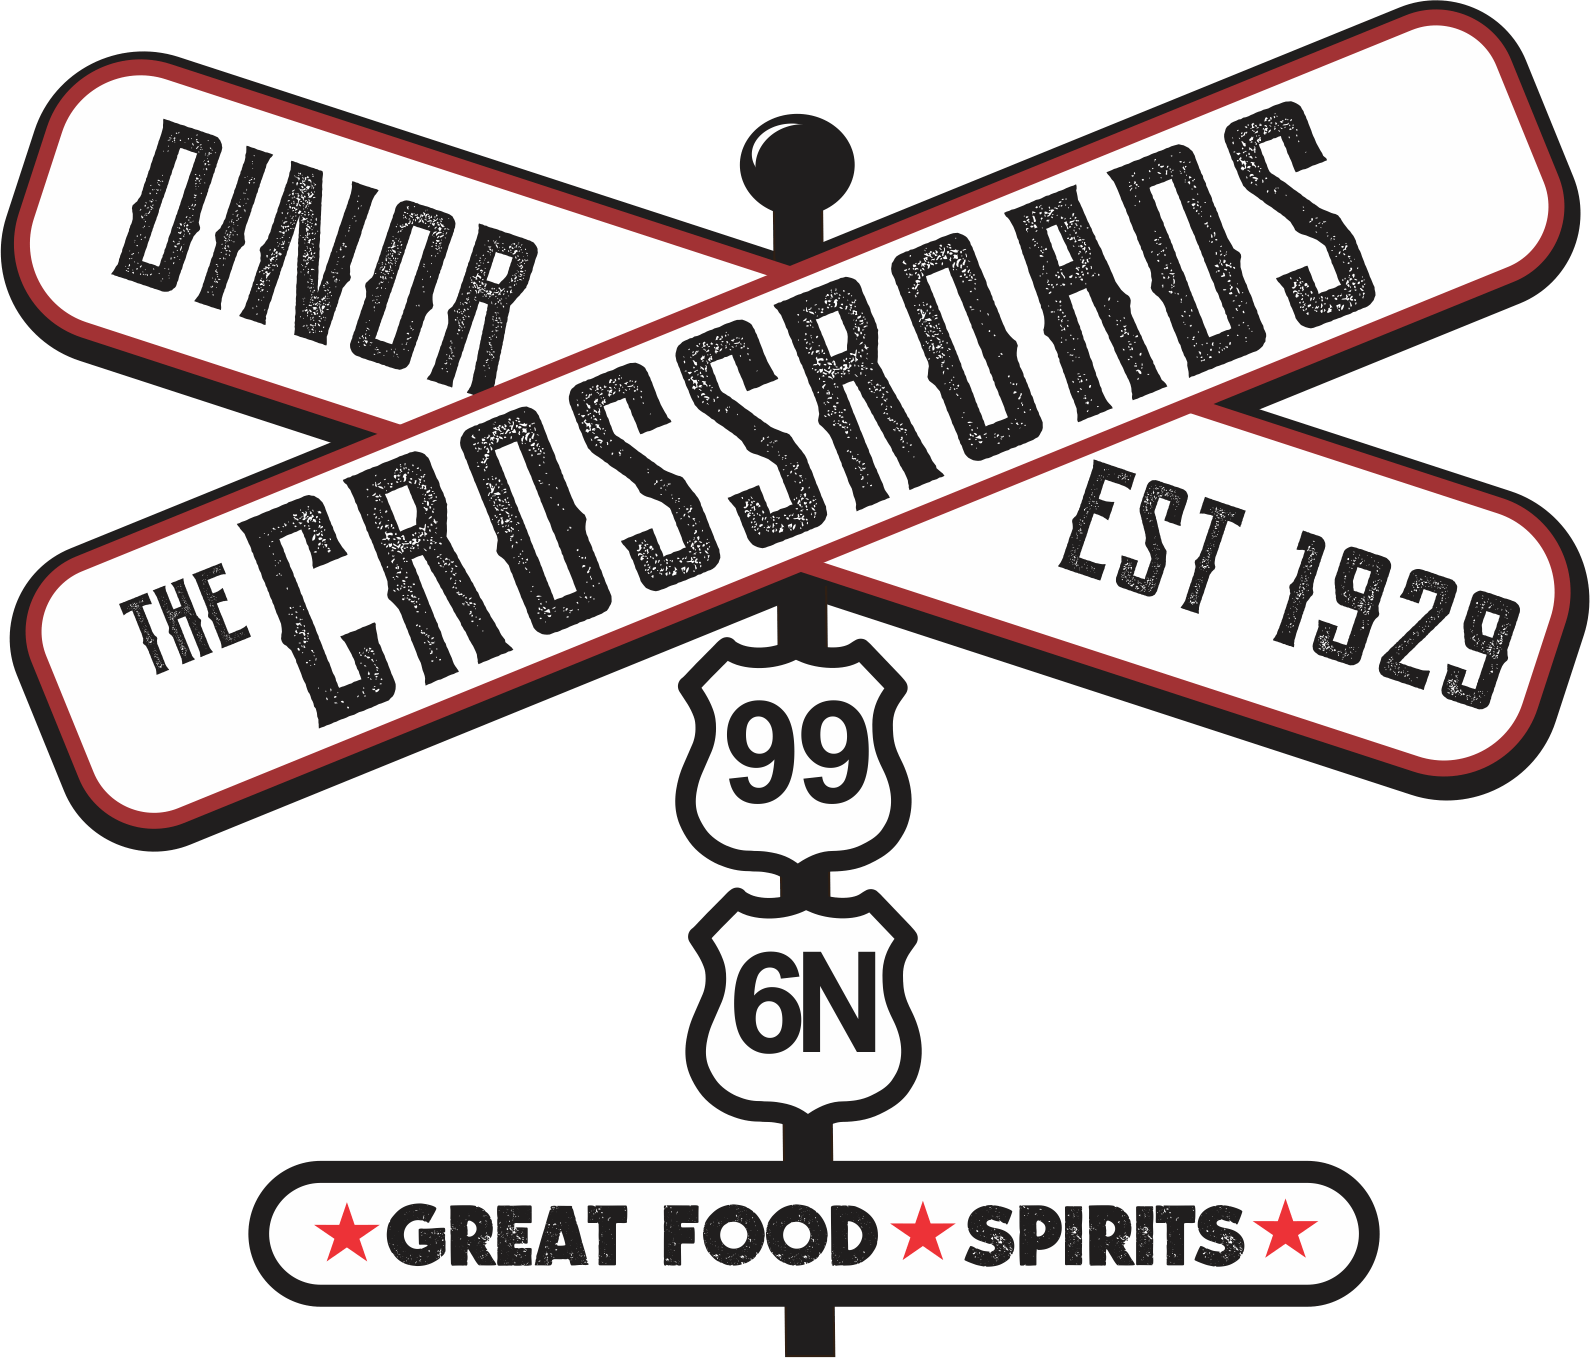 The Crossroads Dinor in Edinboro, PA is home for breakfast, lunch, dinner,  and Live music! Come on down and join the fun!